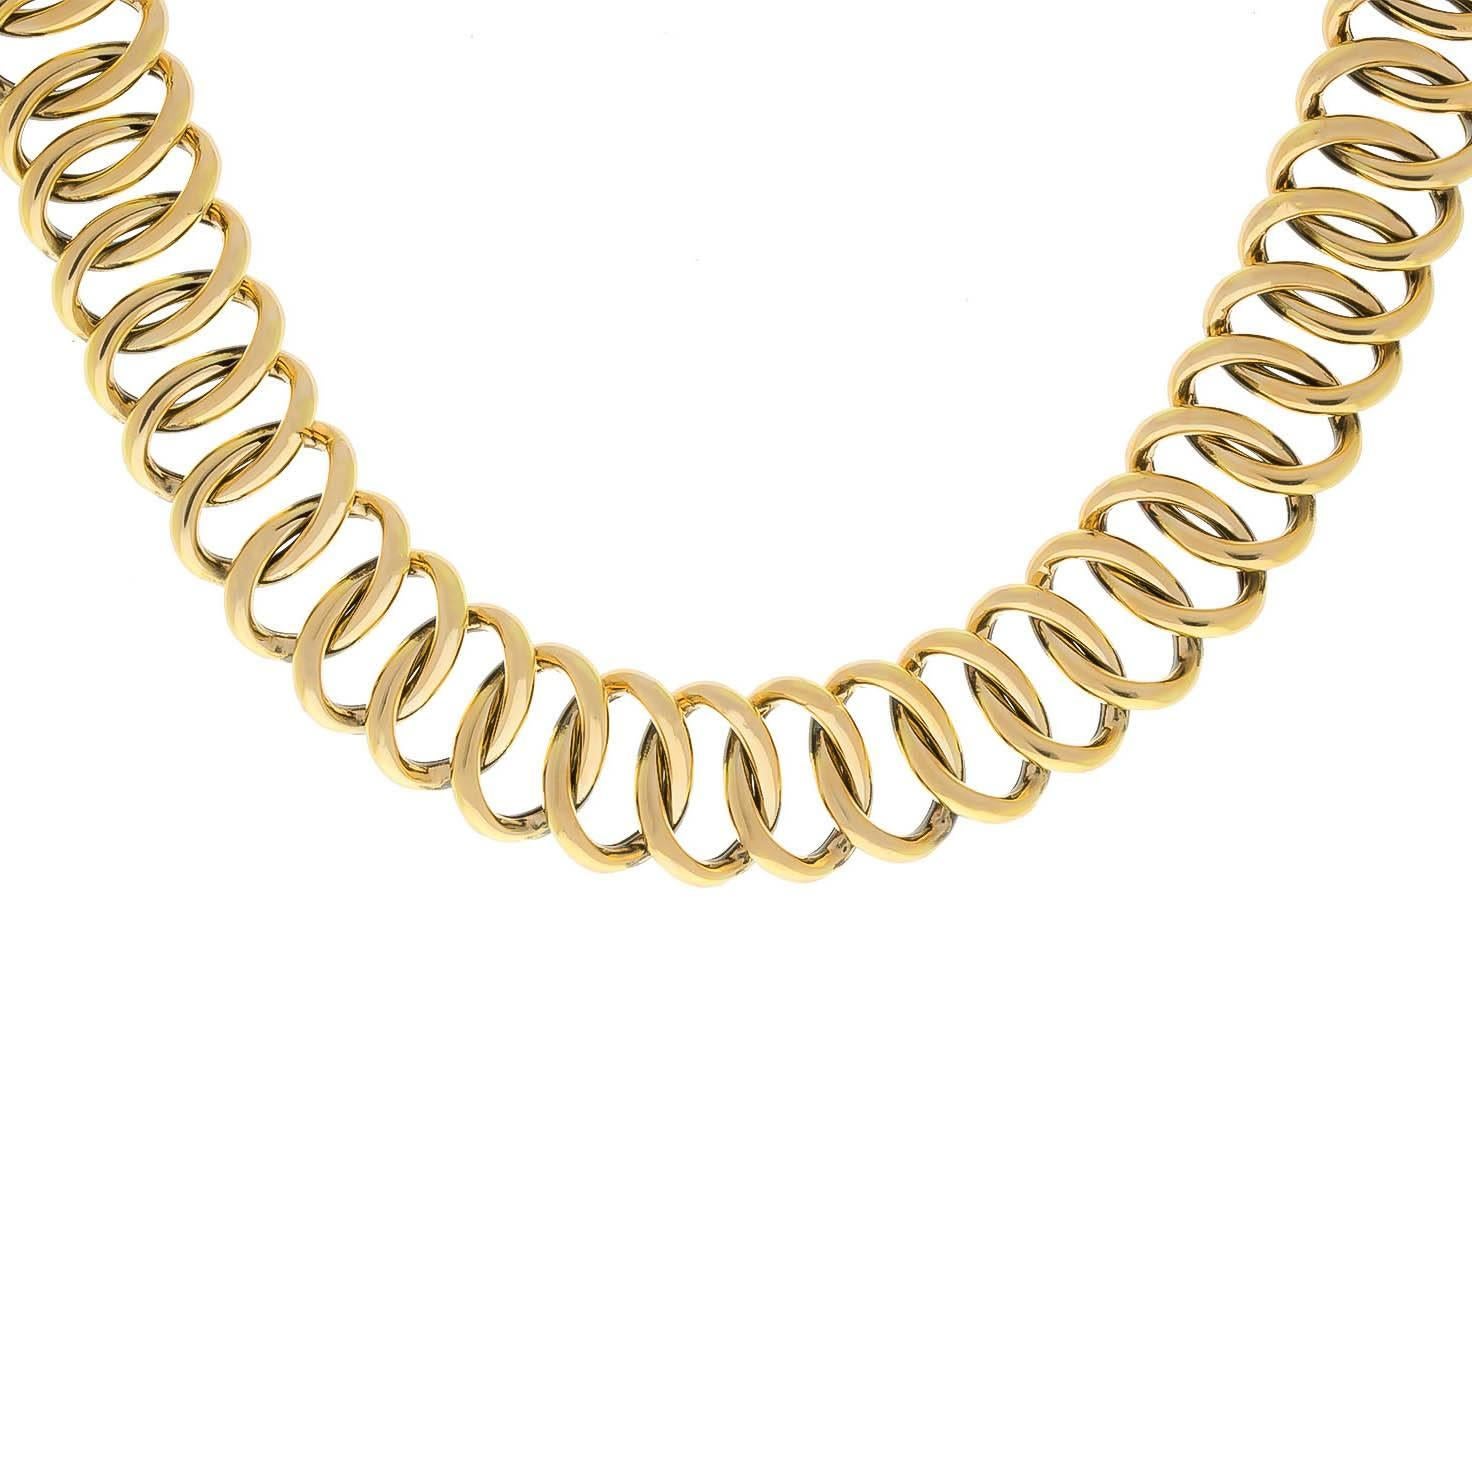 14K yellow gold large oval link necklace. This necklace is very comfortable and follows the shape and movement of your neckline. 